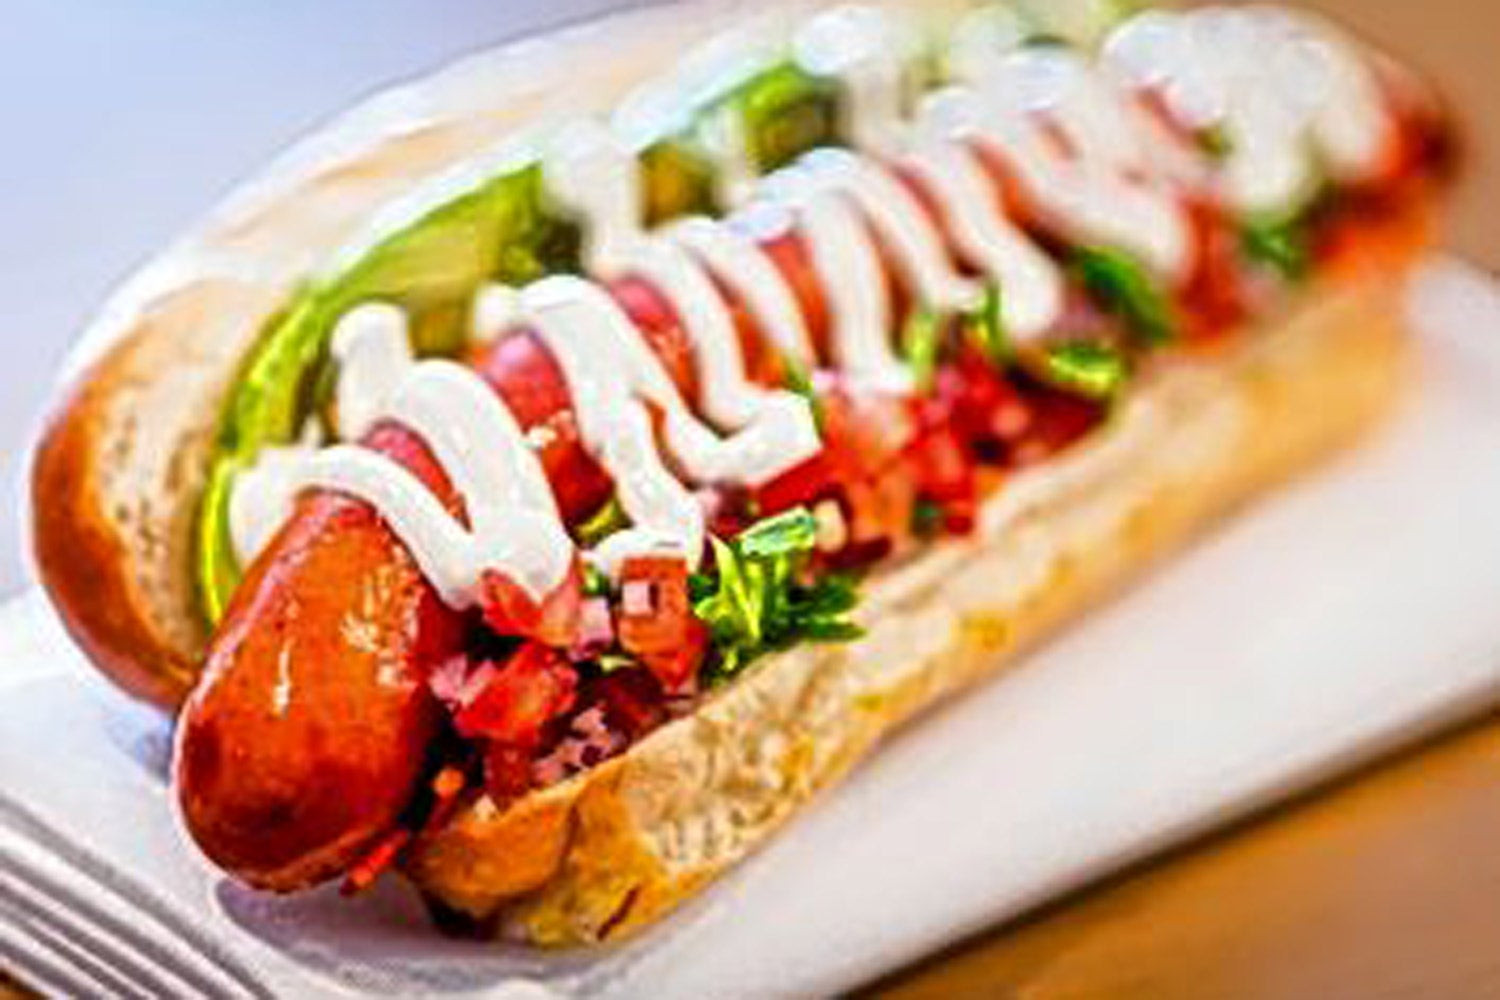 Franks Gourmet Hot Dogs
 The wurst can happen… boom in the gourmet hot dog trend